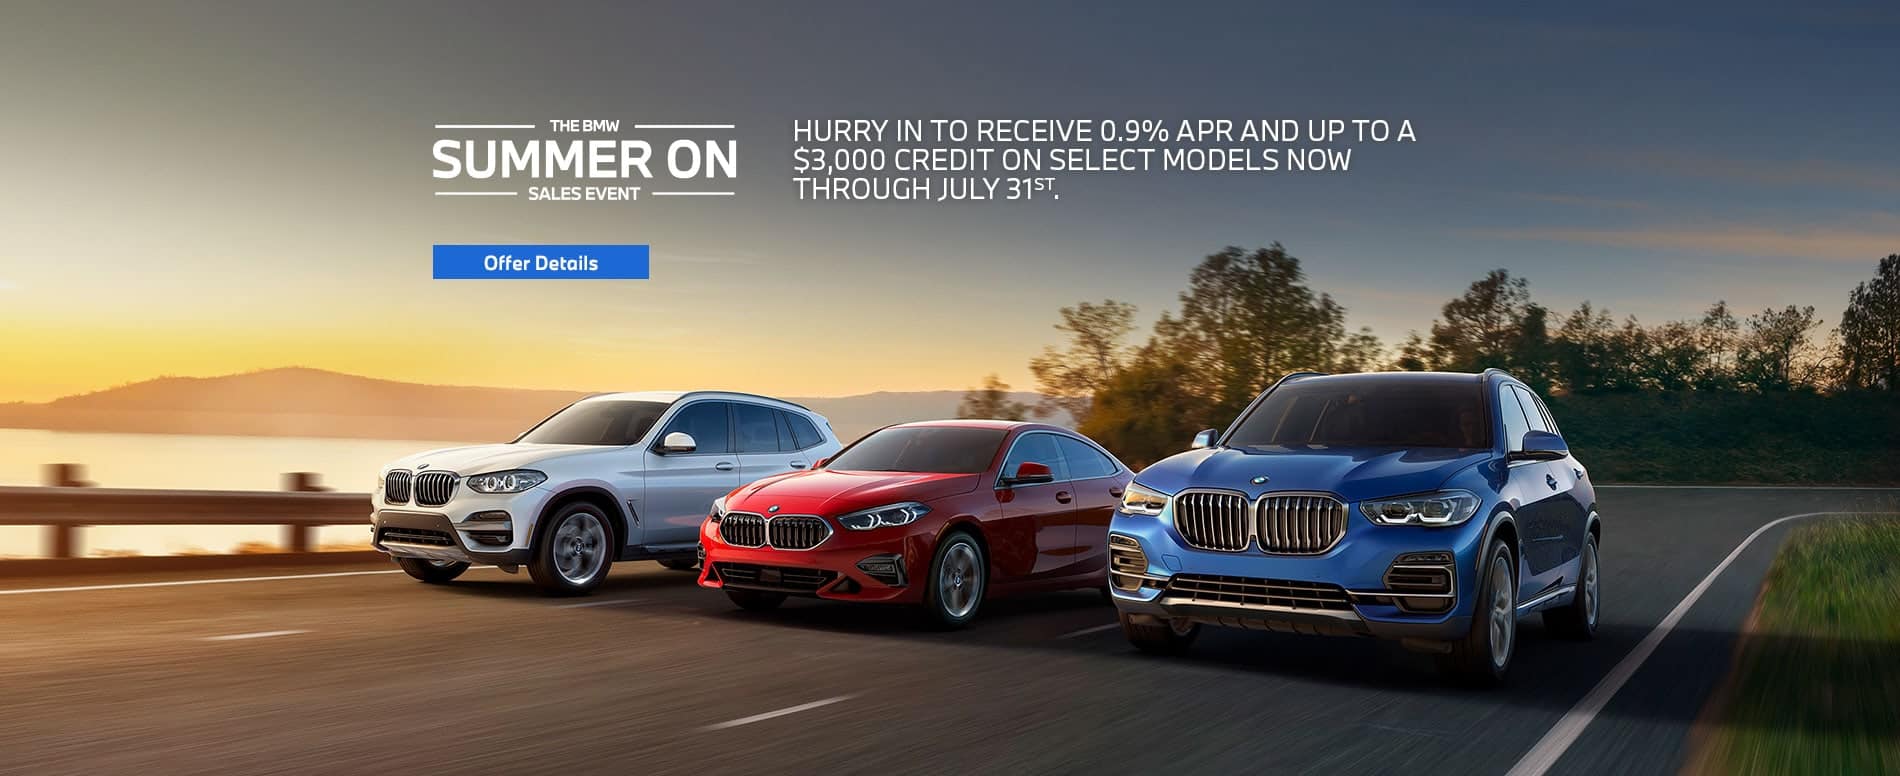 Bmw Of Ontario Your Bmw Dealer Near Chino Hills Ca